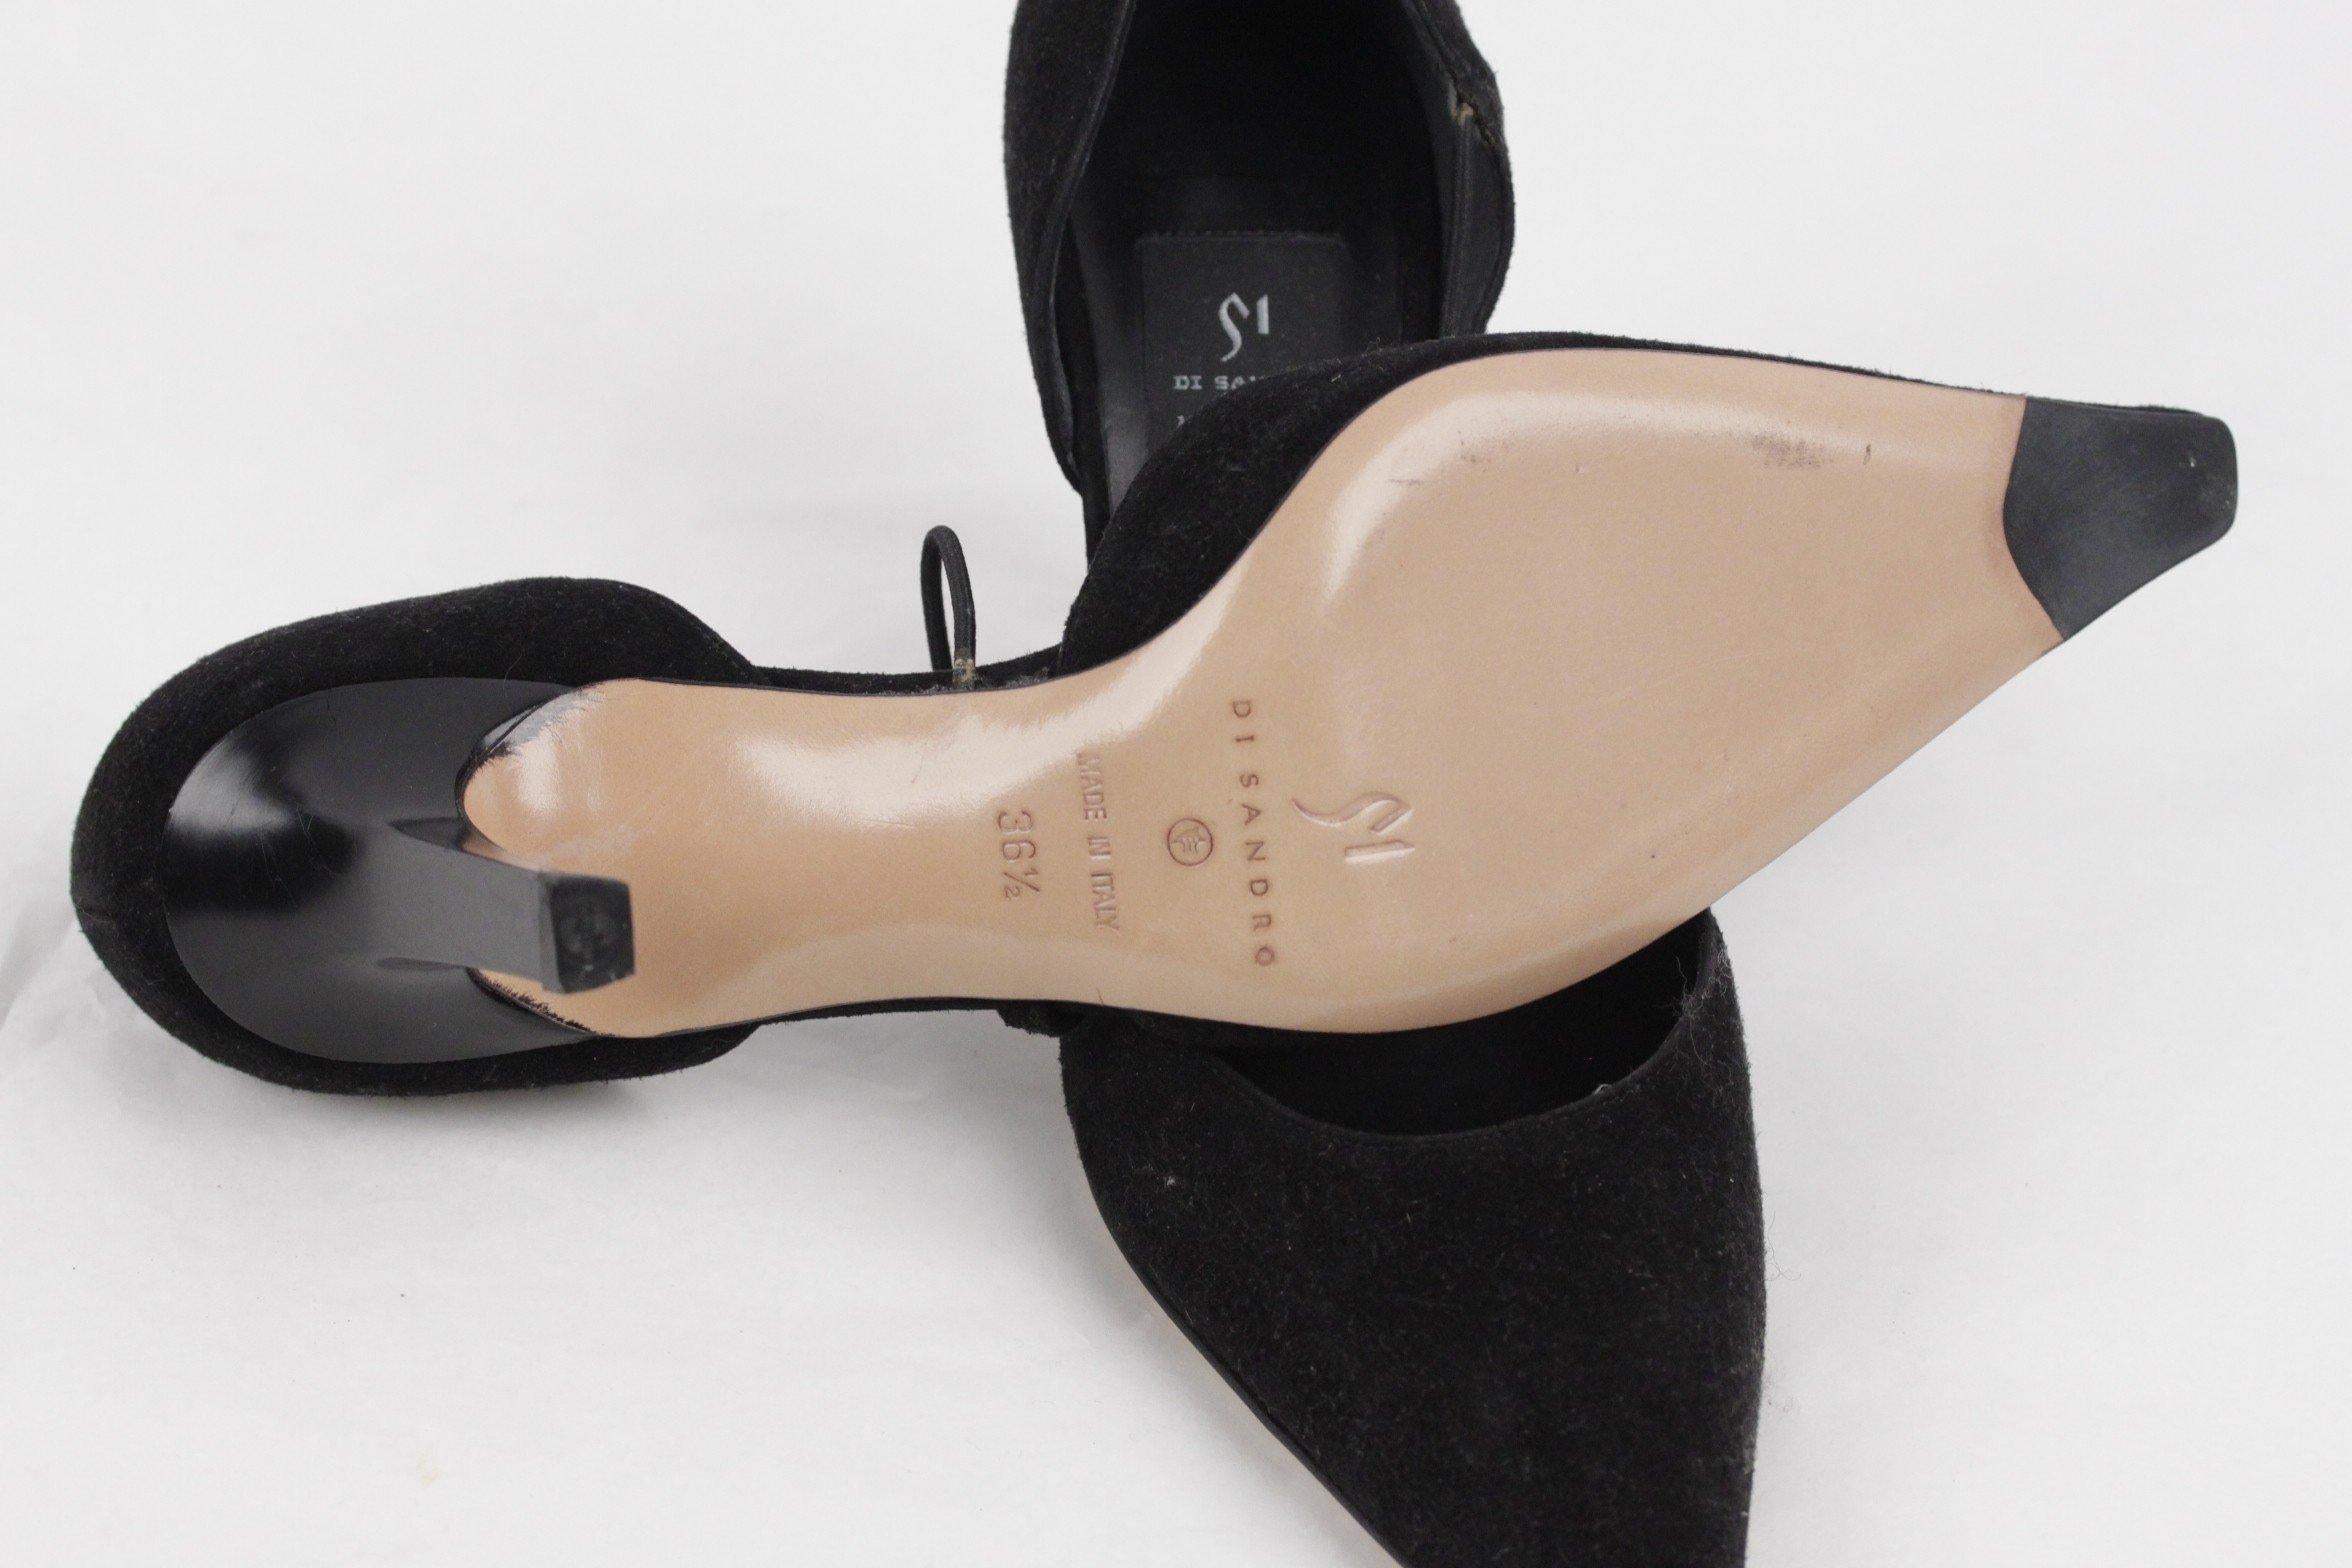 DI SANDRO Black D'ORSAY PUMPS Heels SHOES w/ Crystal Buckle SIZE 36.5 IT 4